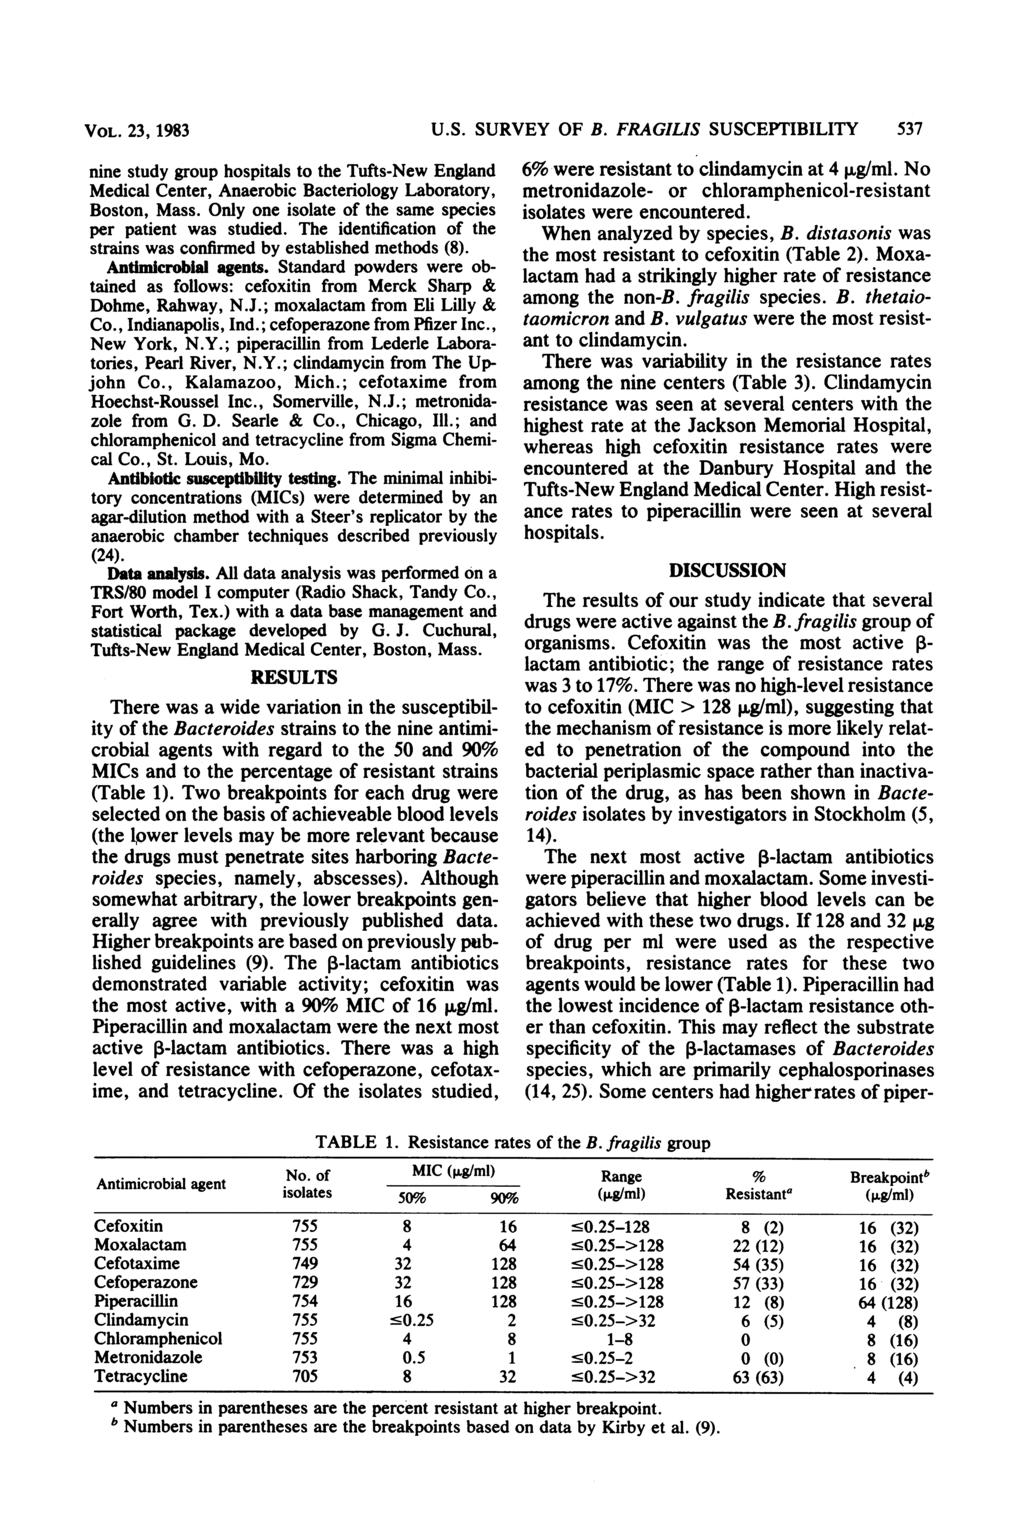 VOL. 23, 1983 nine study group hospitals to the Tufts-New England, Anaerobic Bacteriology Laboratory, Boston, Mass. Only one isolate of the same species per patient was studied.